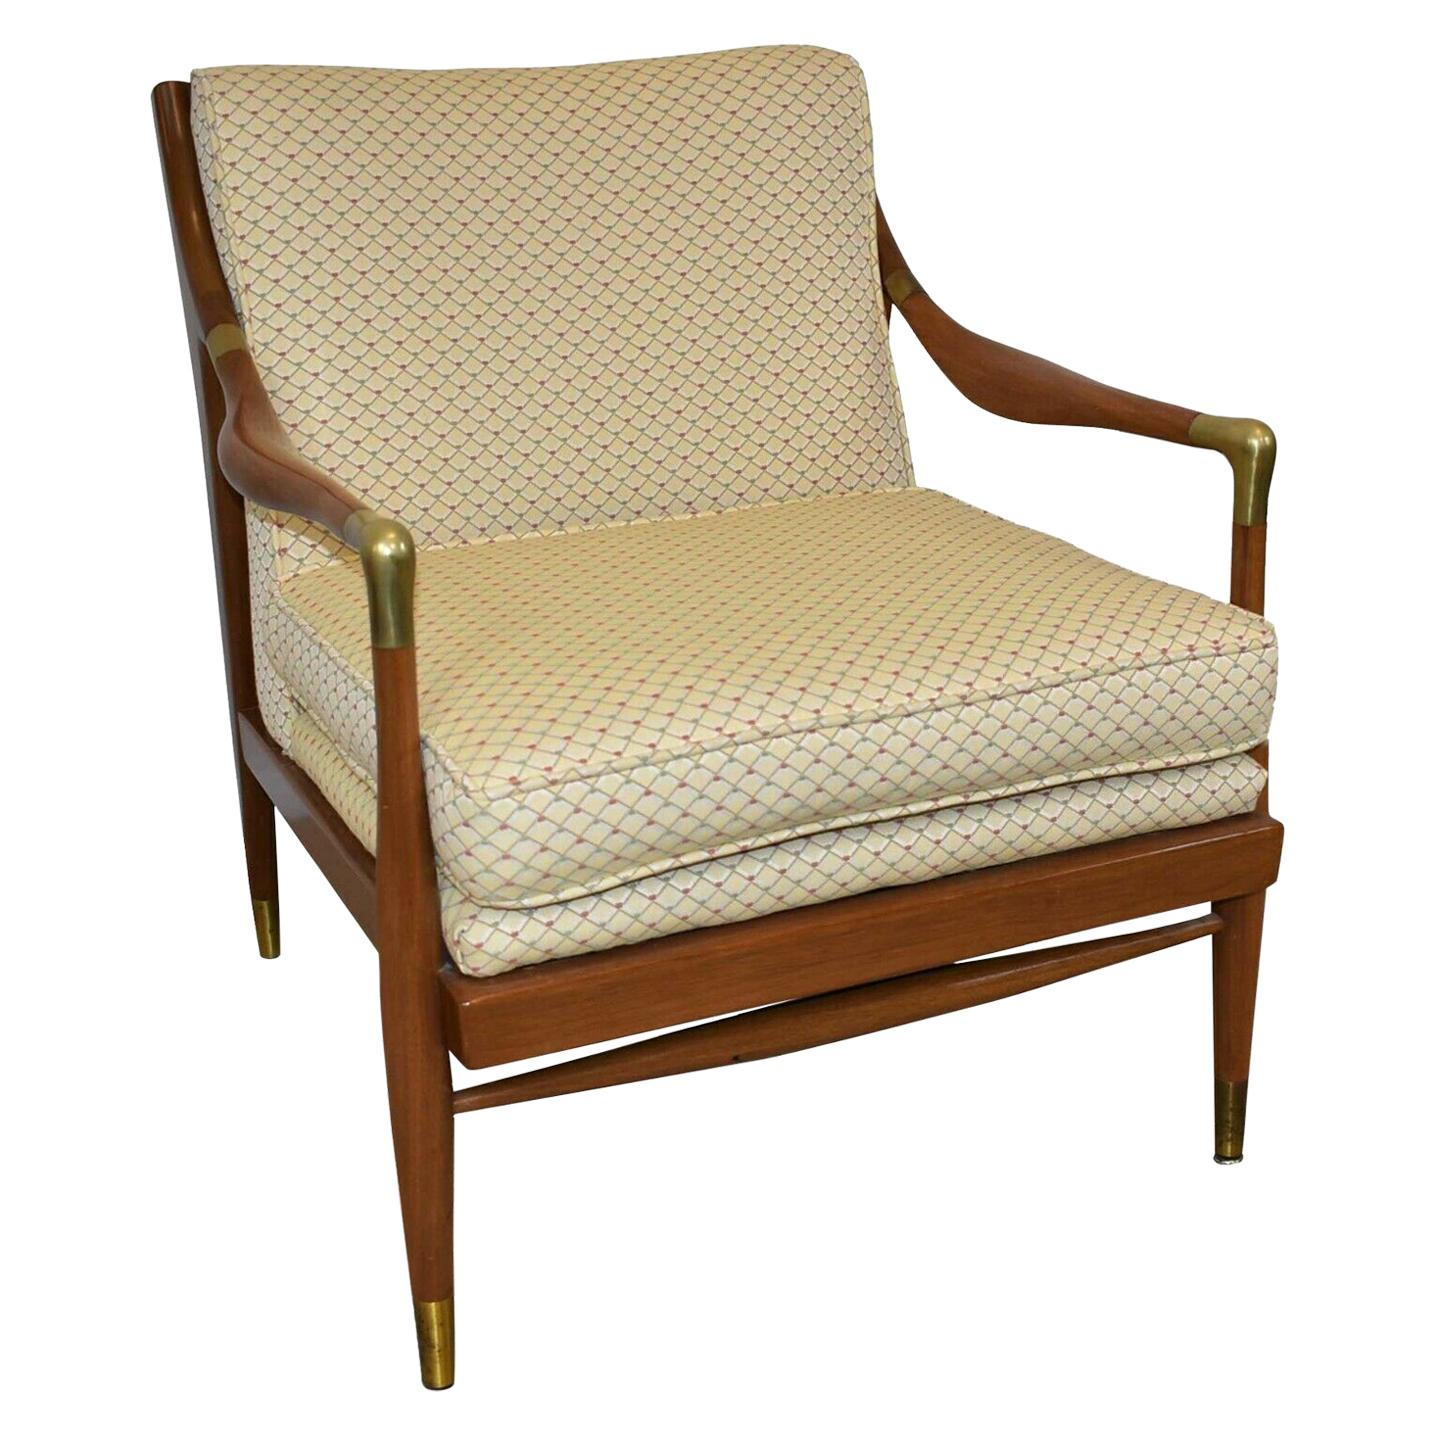 Sculpted Danish Brass Accented Lounge Chair Attributed To IB Kofod-Larsen, 1960s